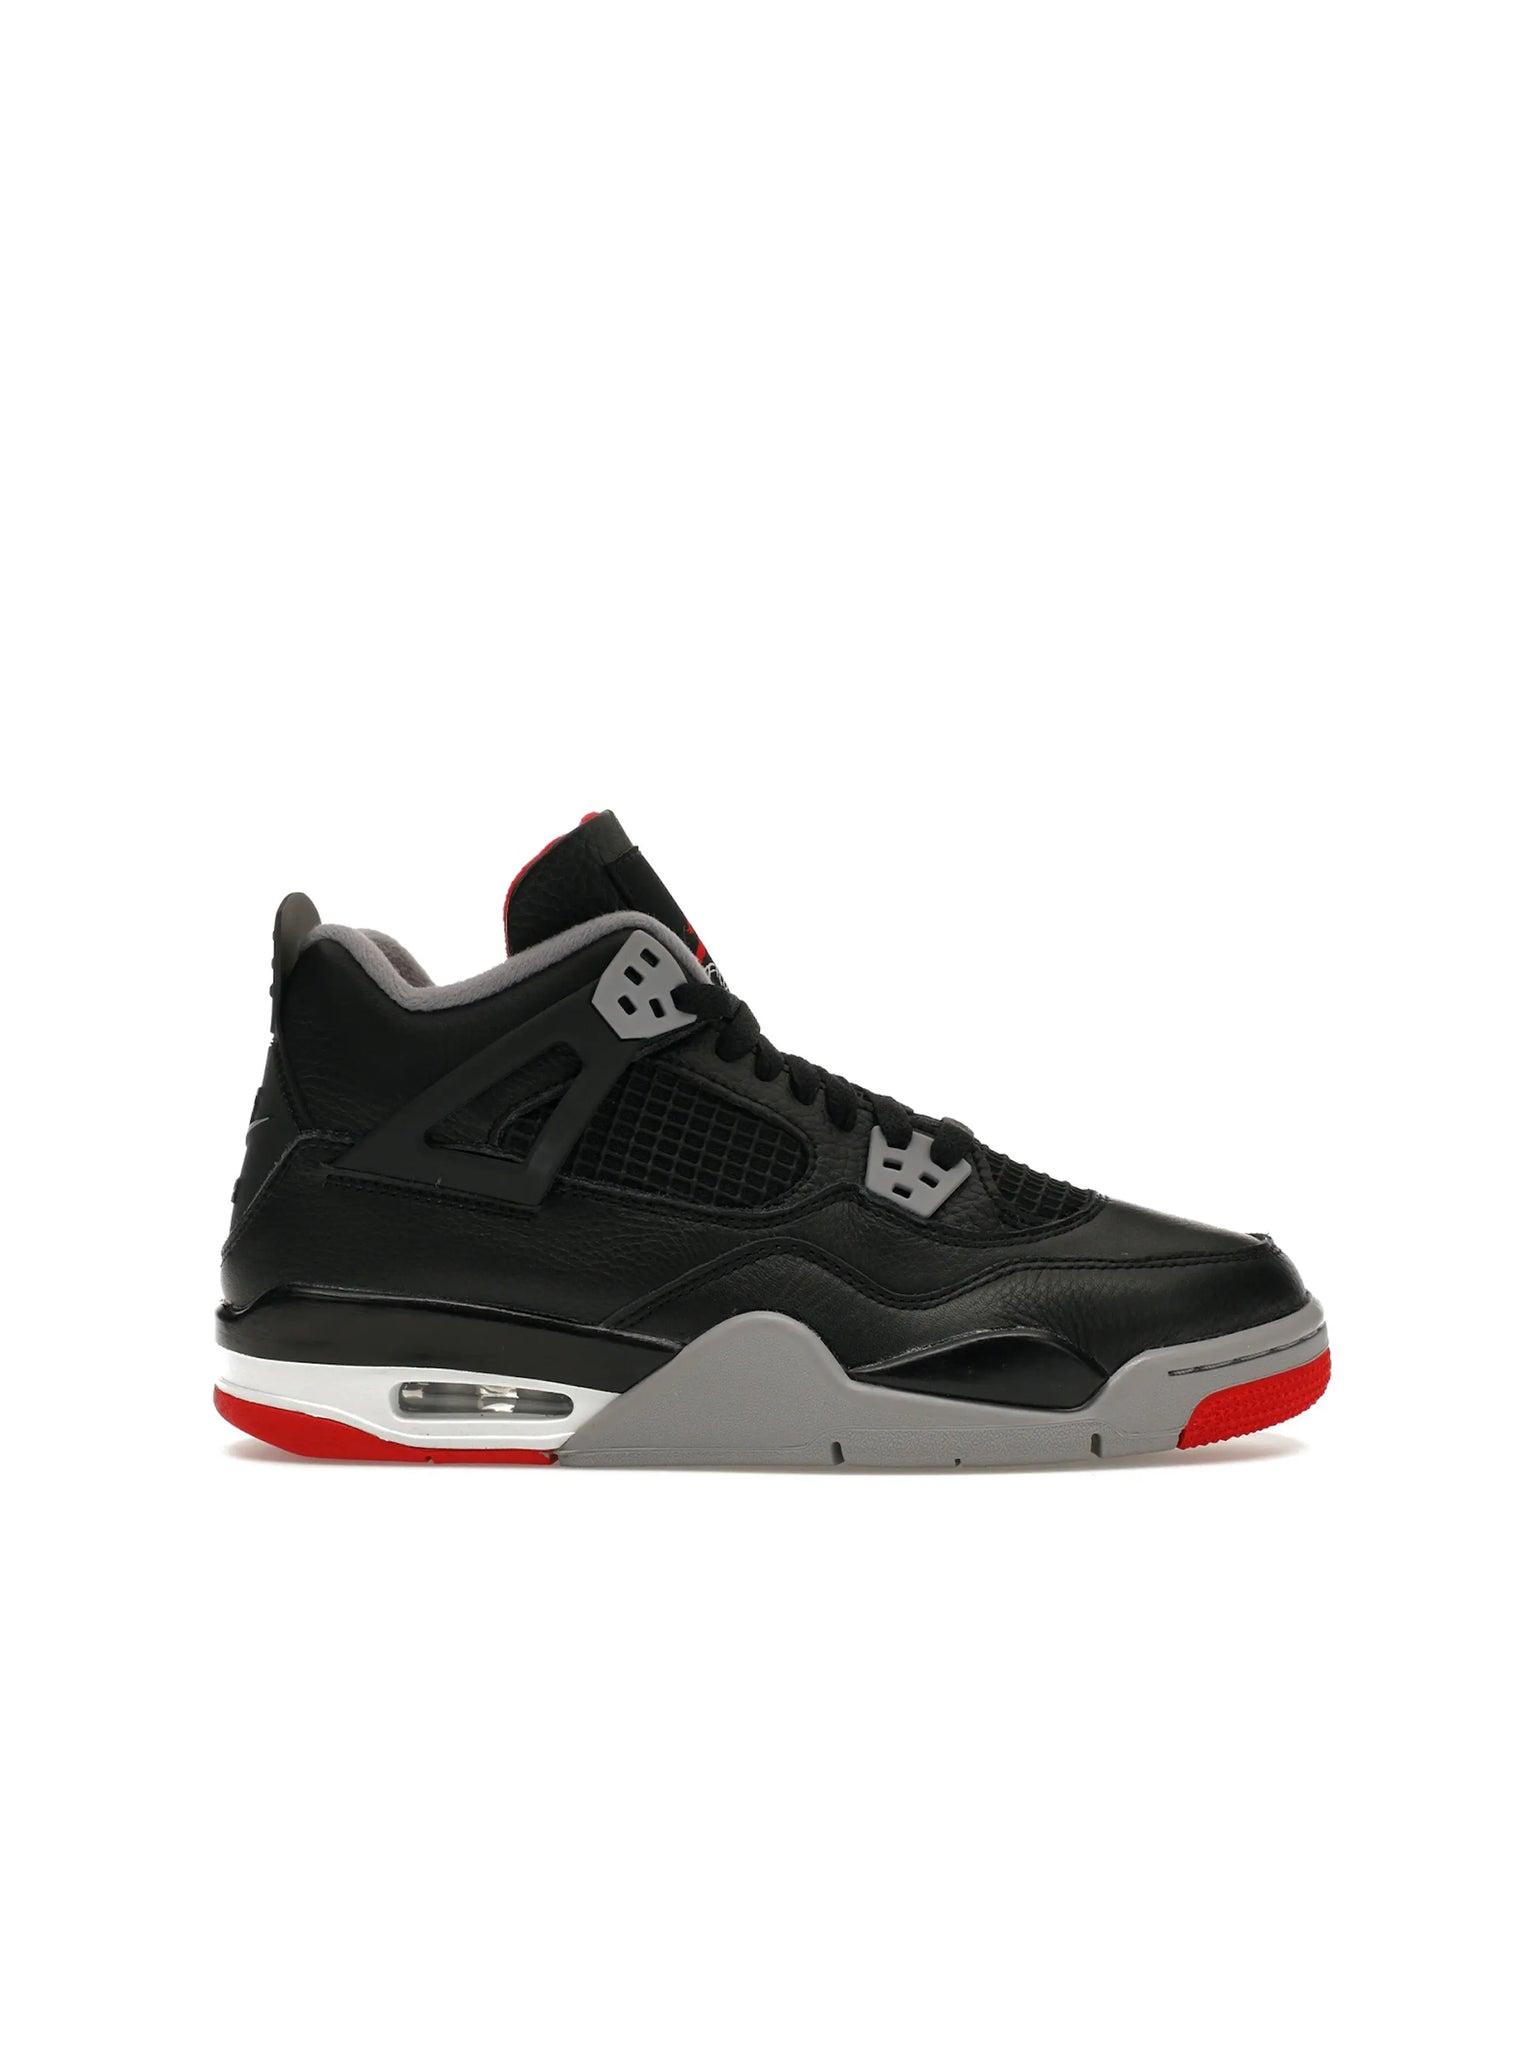 Nike Air Jordan 4 Retro Bred Reimagined (GS) in Auckland, New Zealand - Shop name